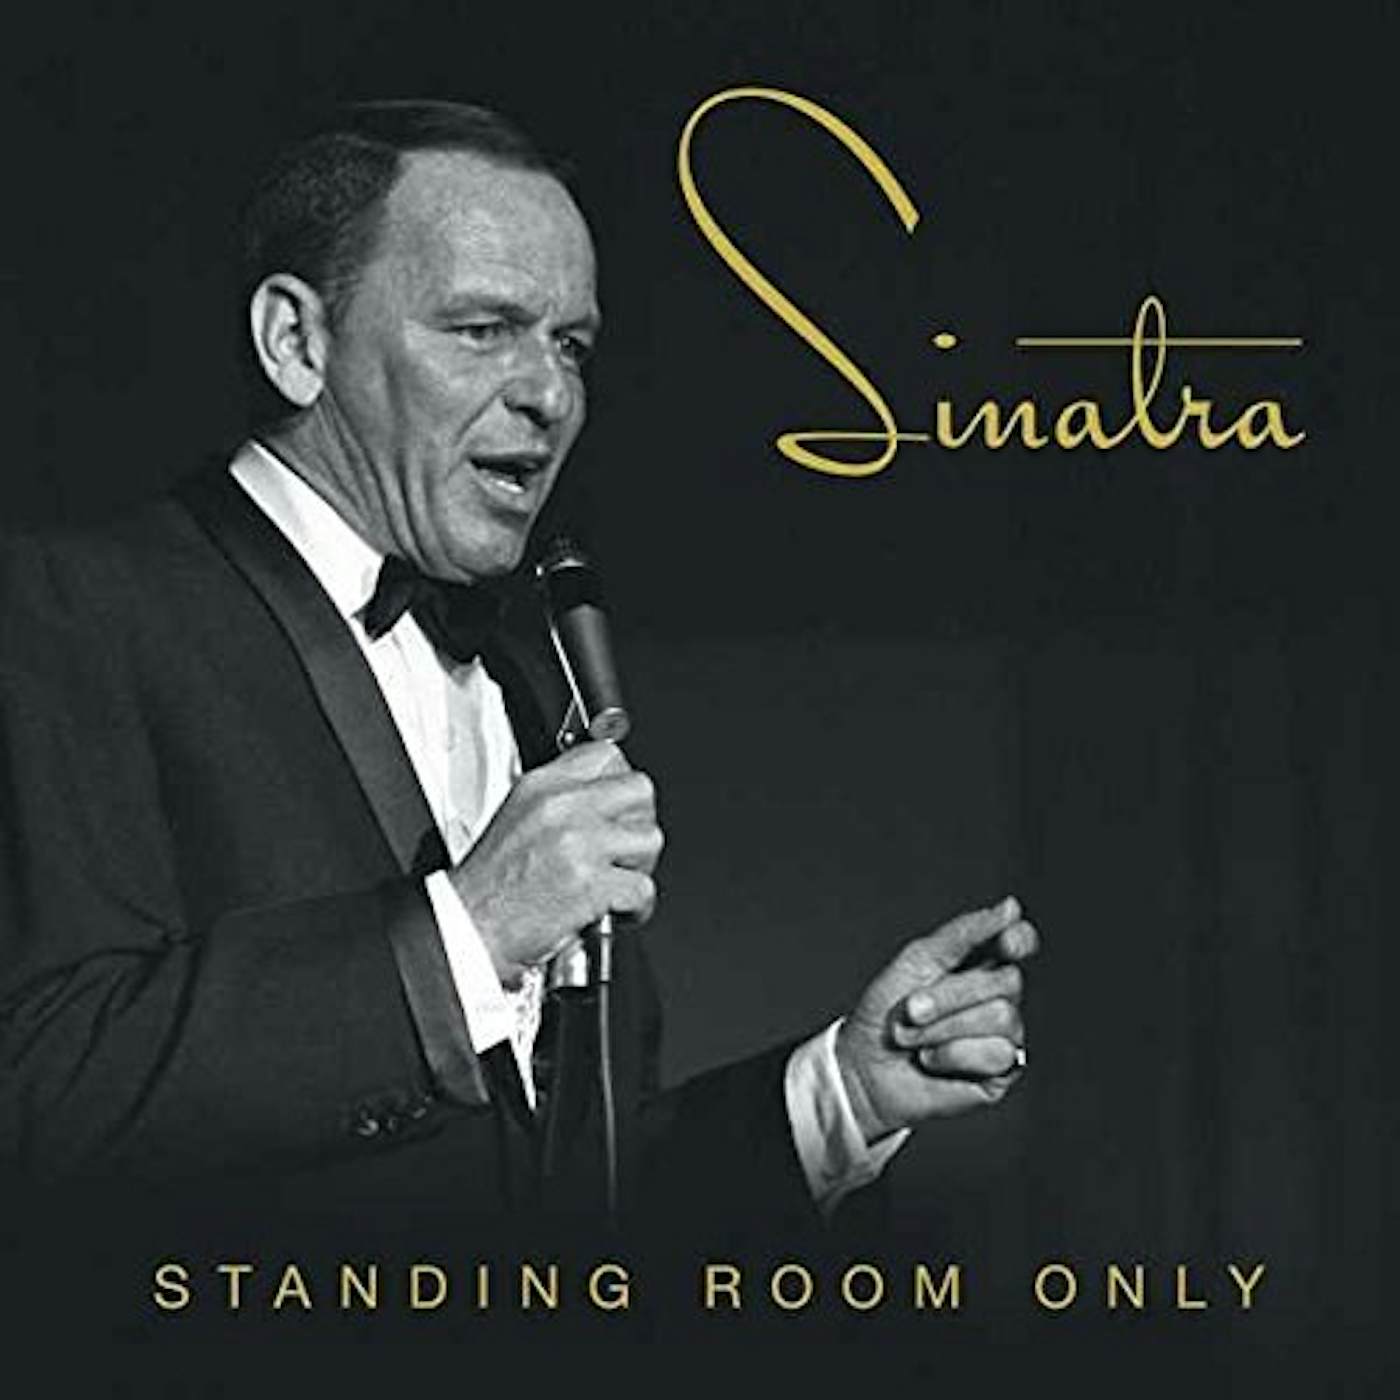 Frank Sinatra STANDING ROOM ONLY CD